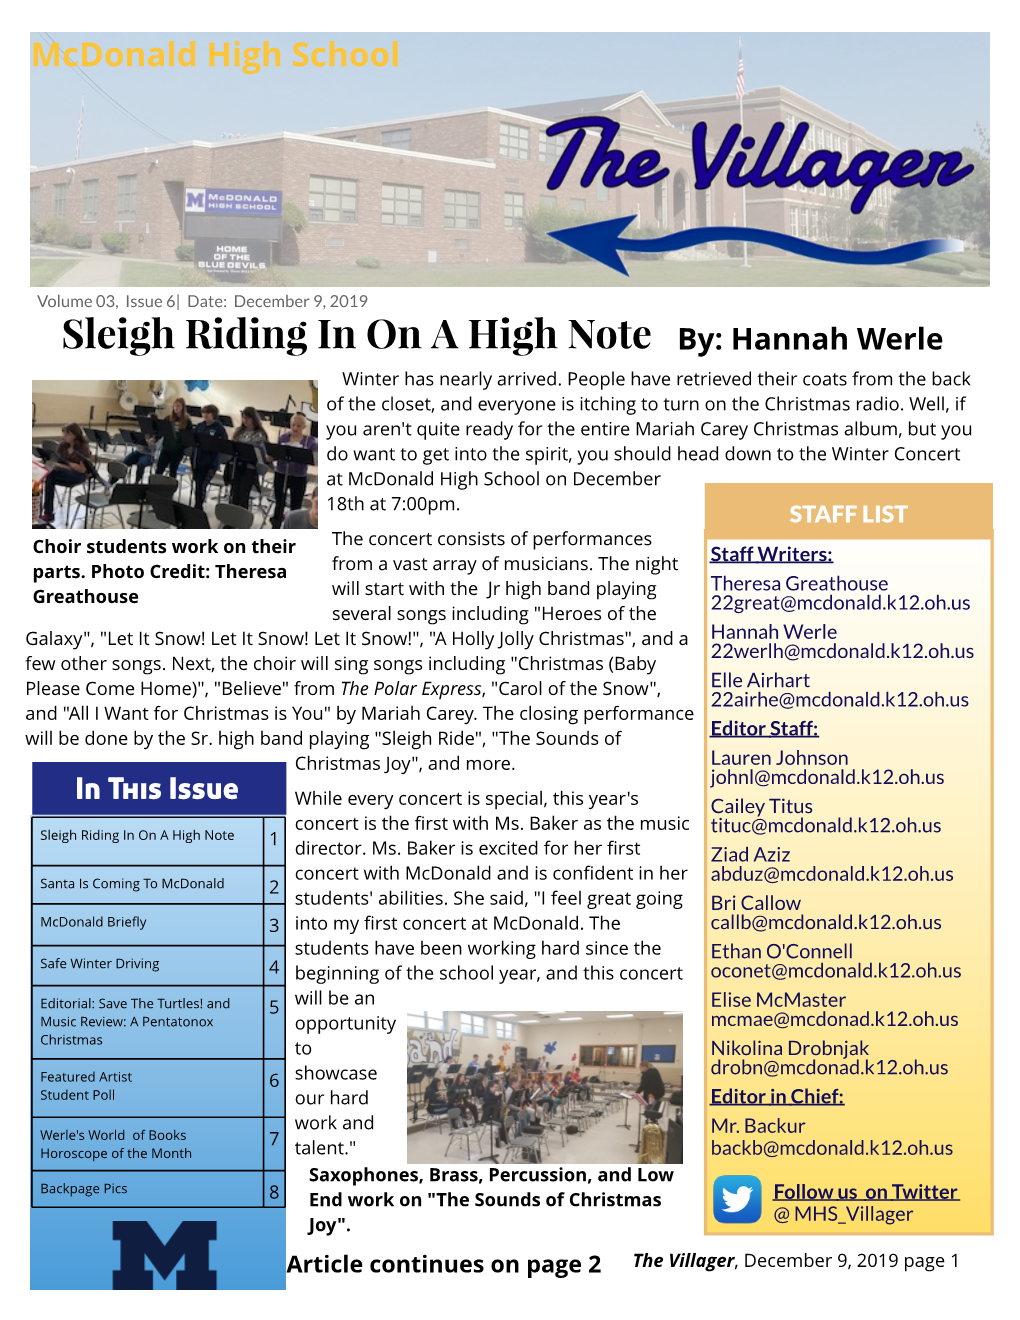 Sleigh Riding in on a High Note By: Hannah Werle Winter Has Nearly Arrived